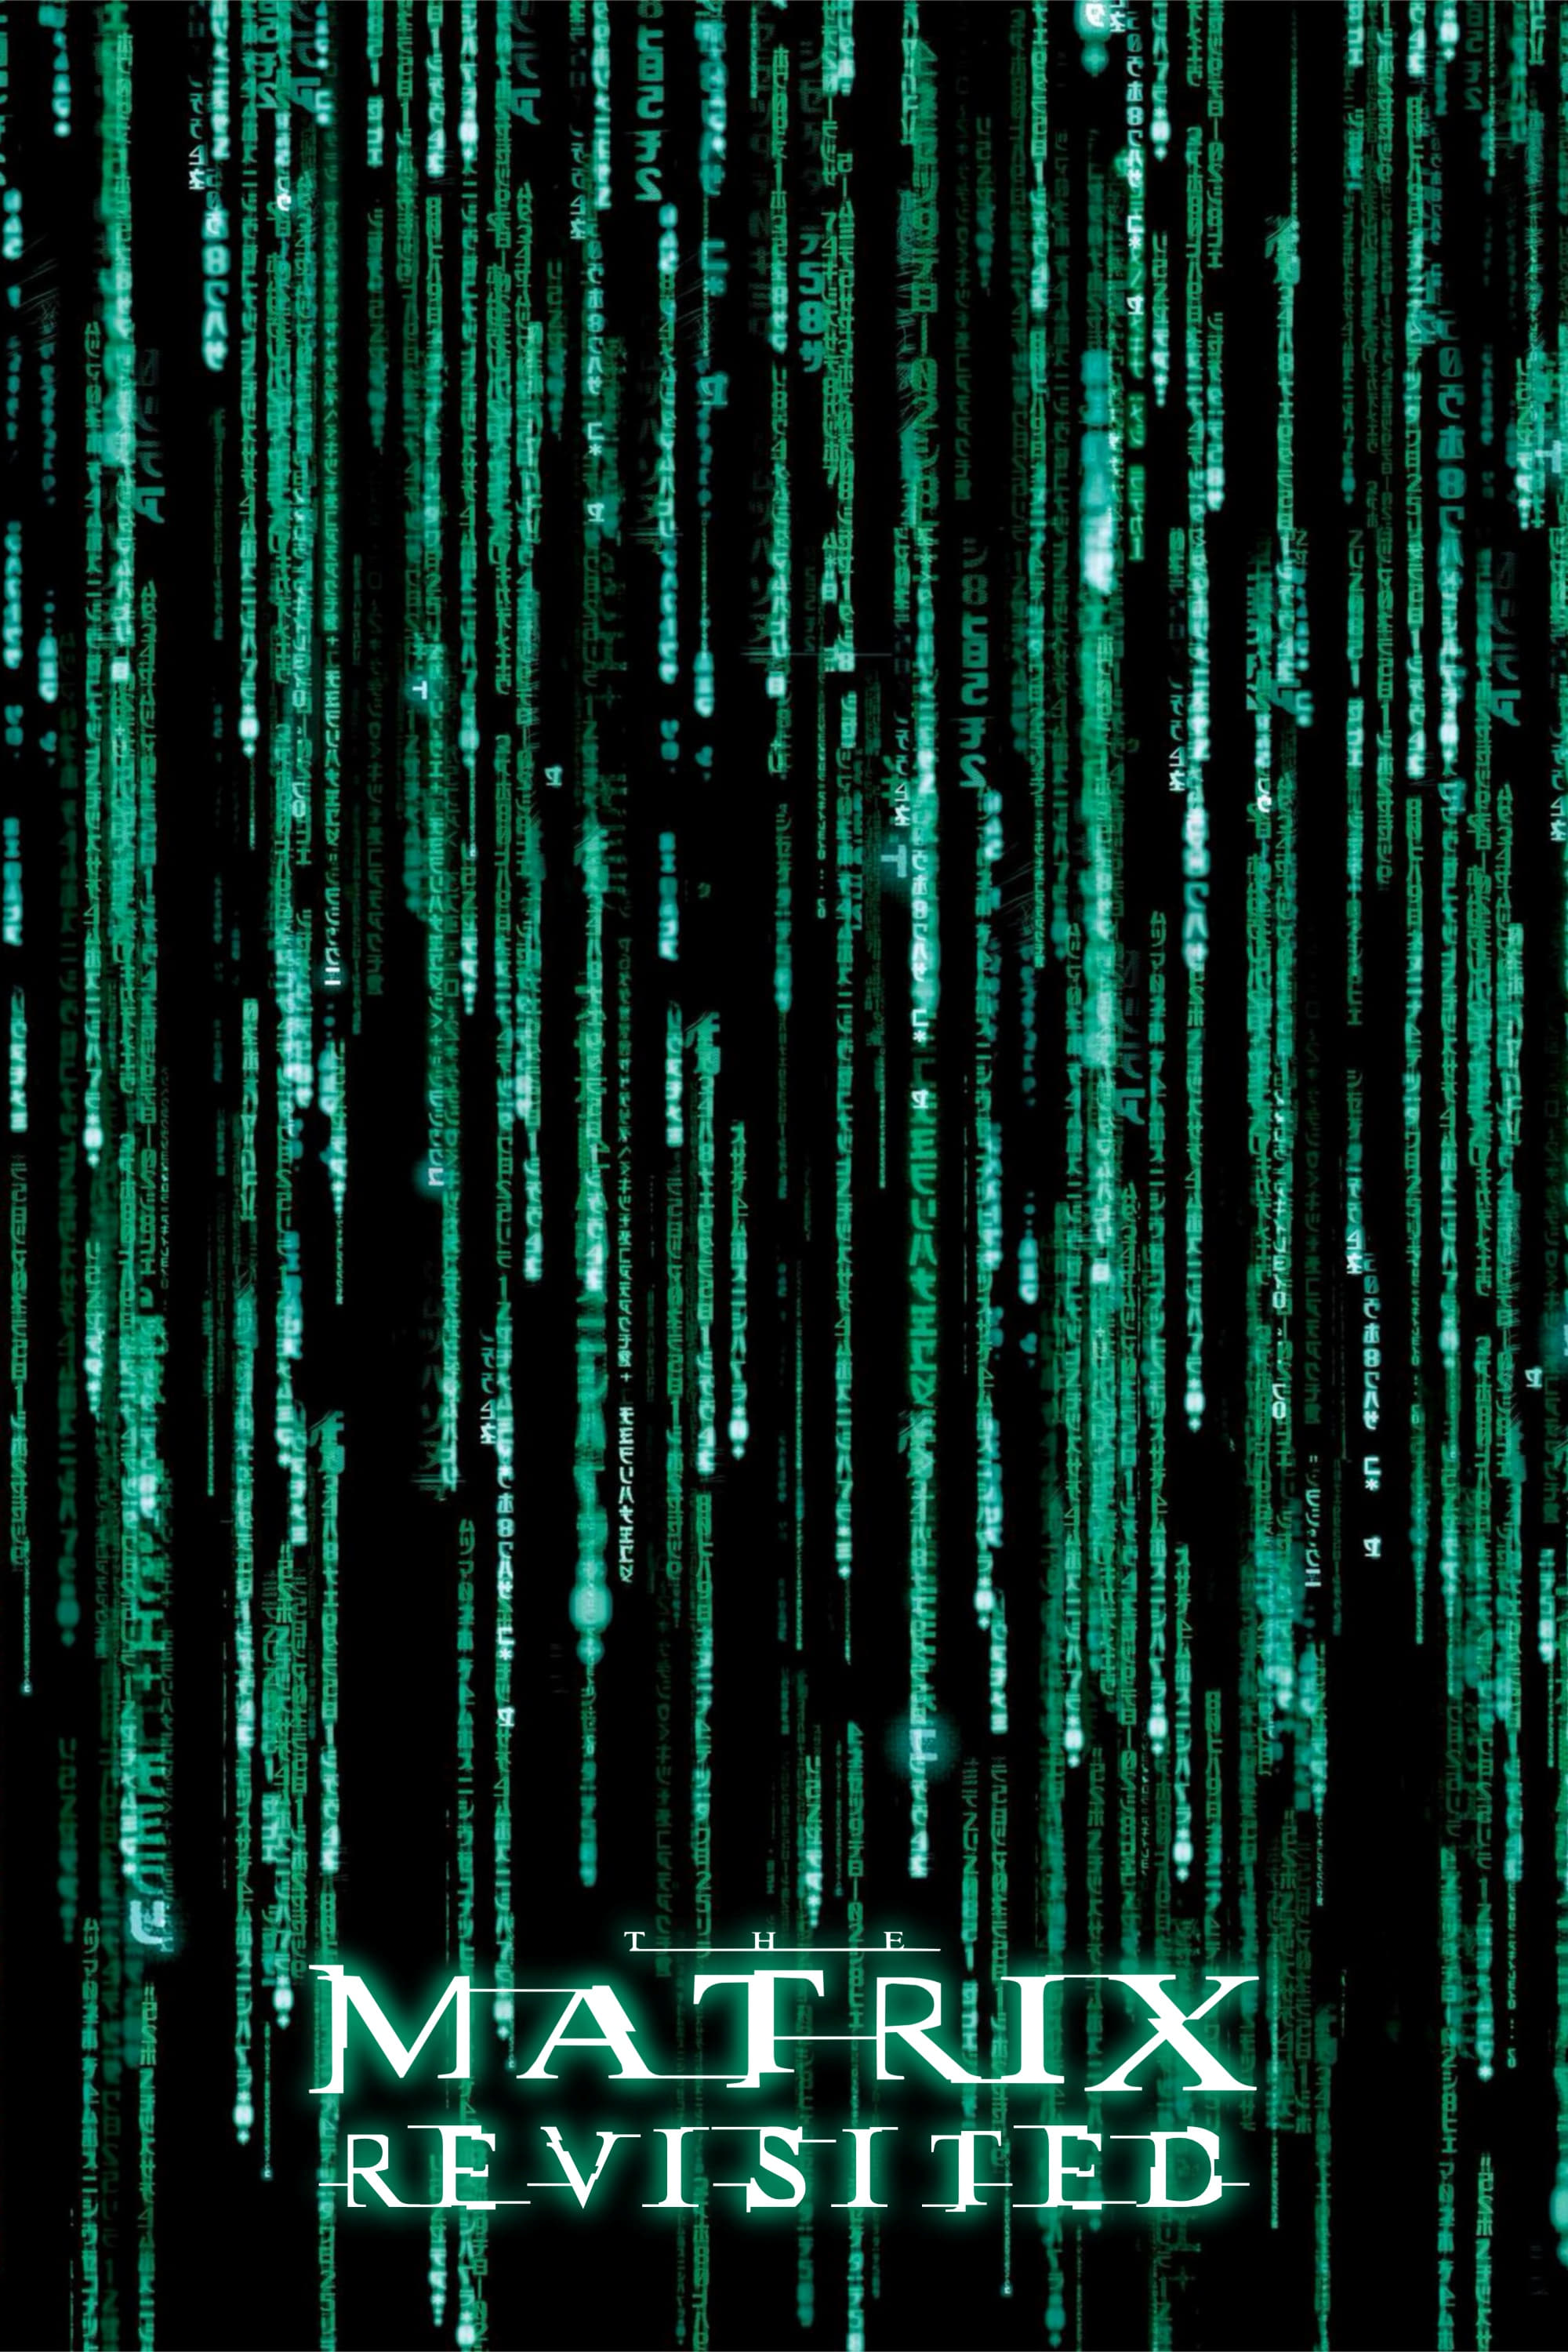 The Matrix Revisited (2001)